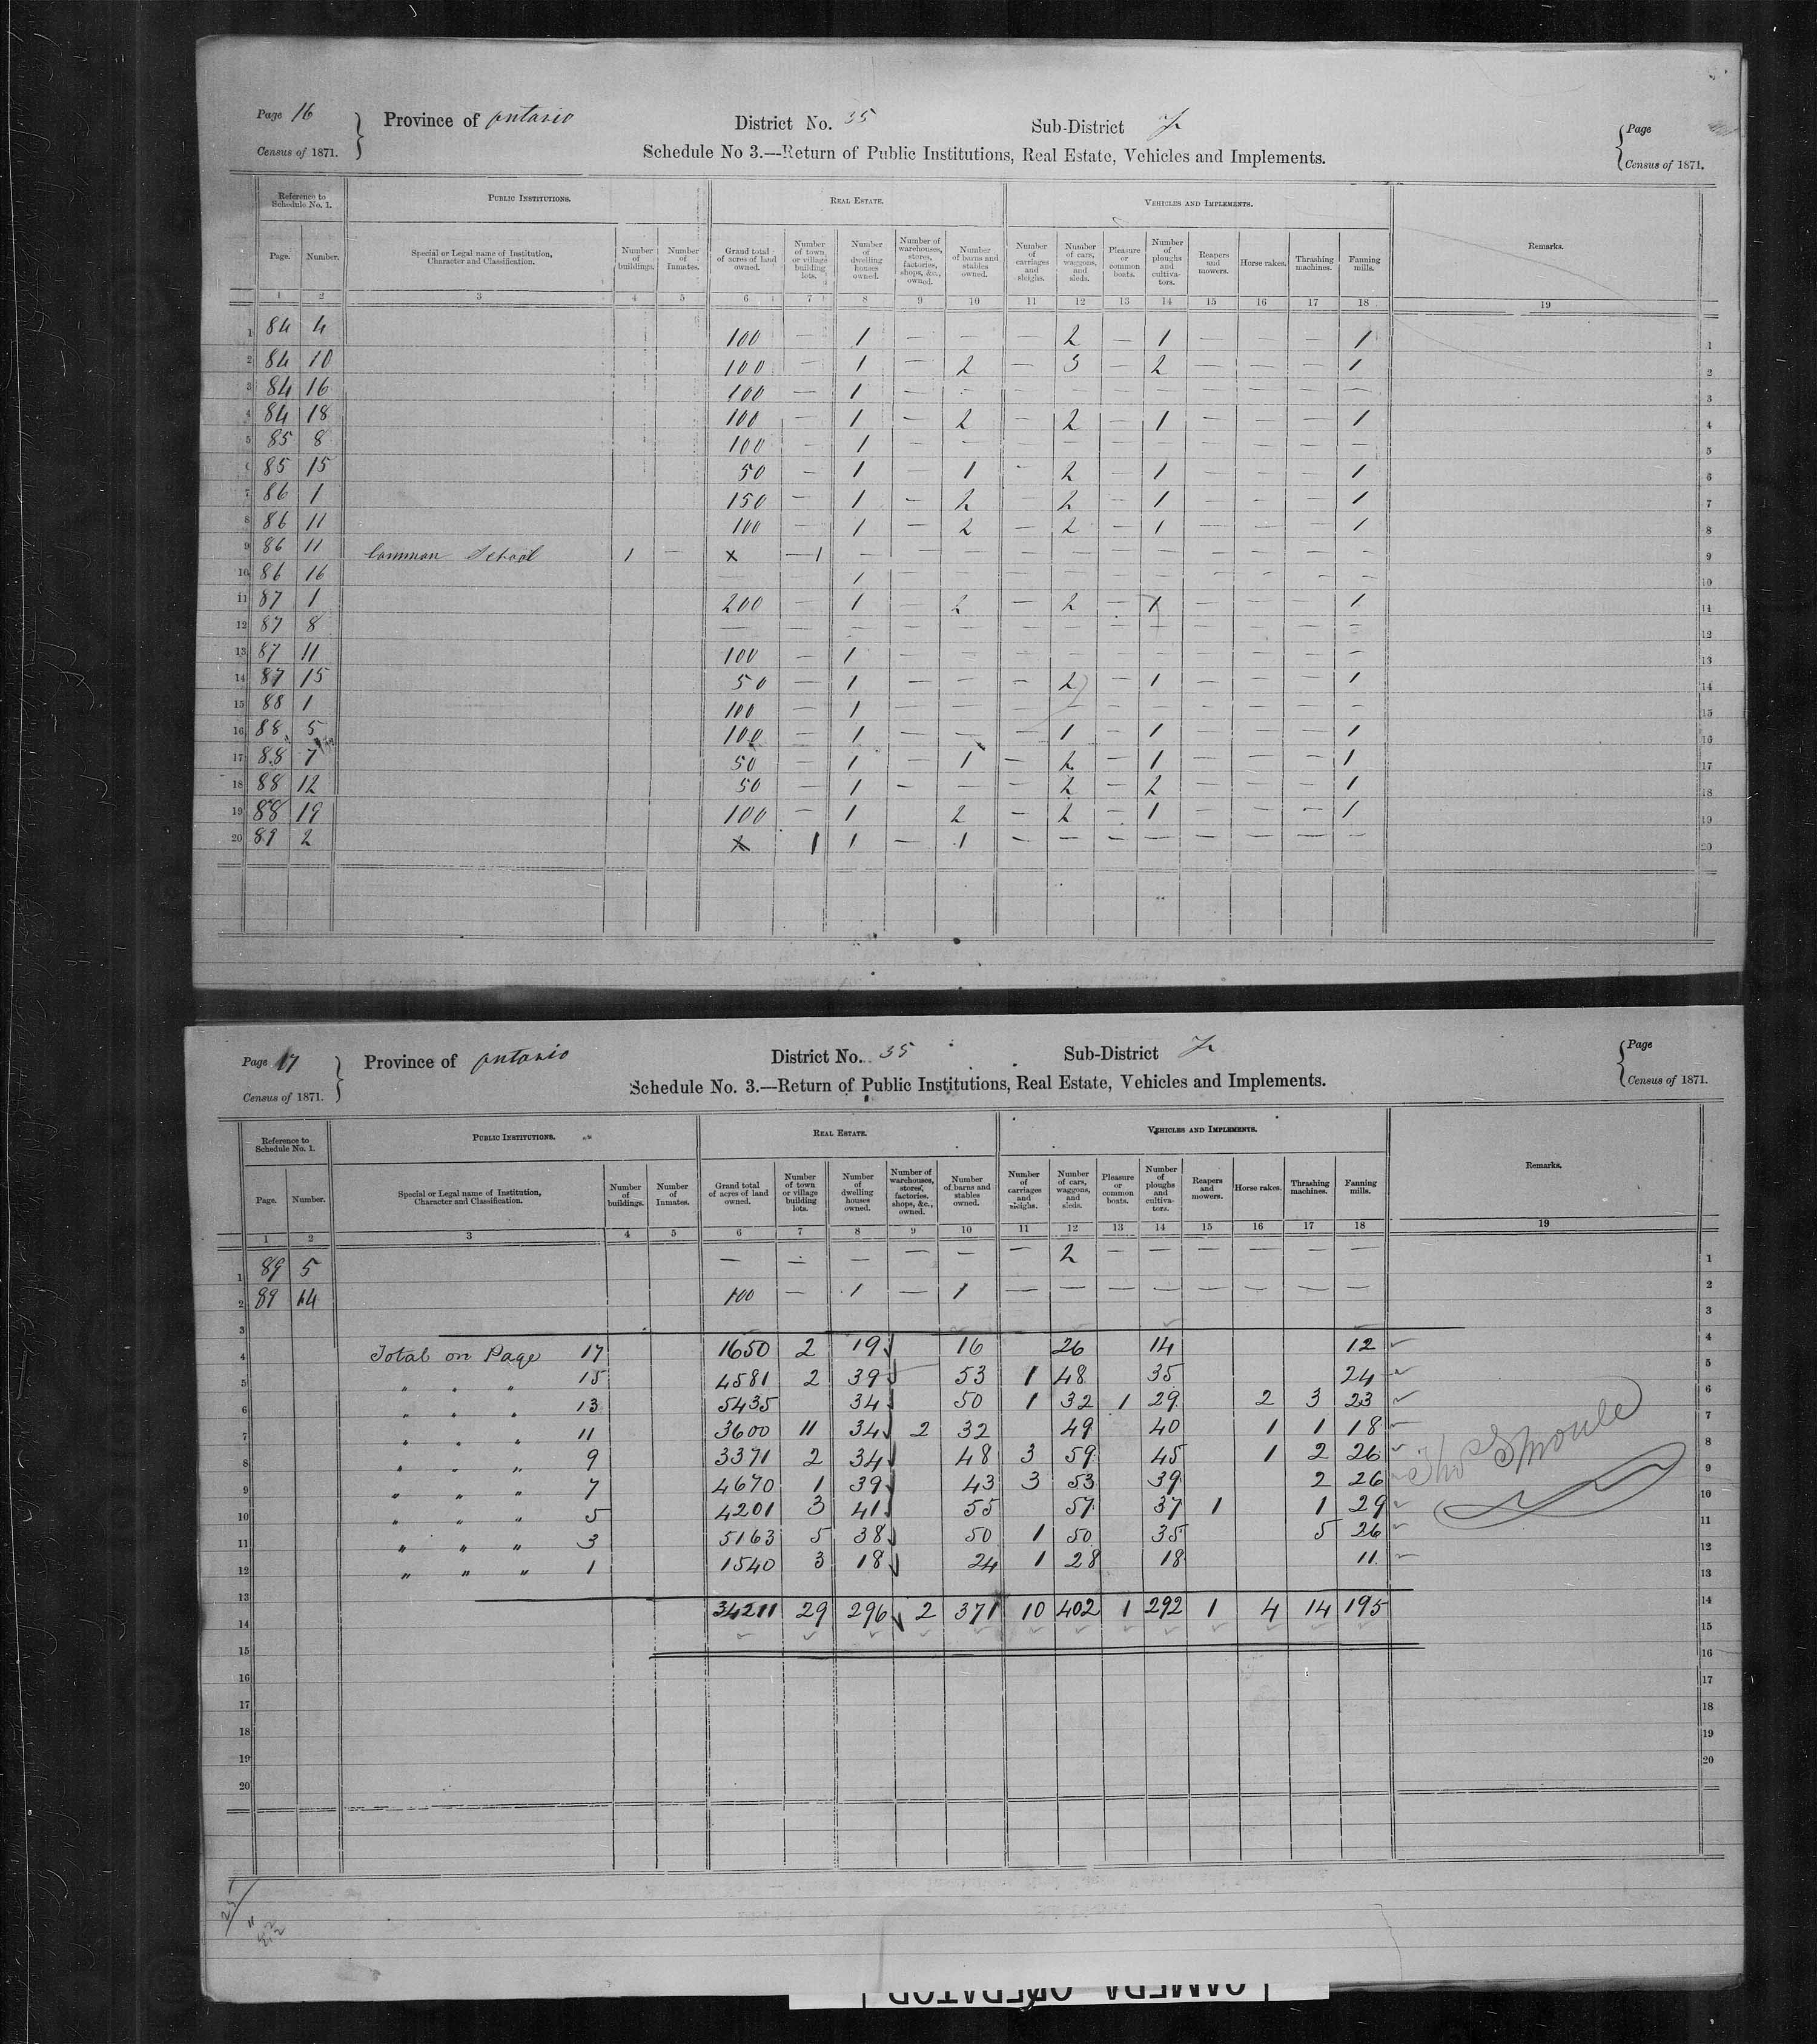 Title: Census of Canada, 1871 - Mikan Number: 142105 - Microform: c-9950